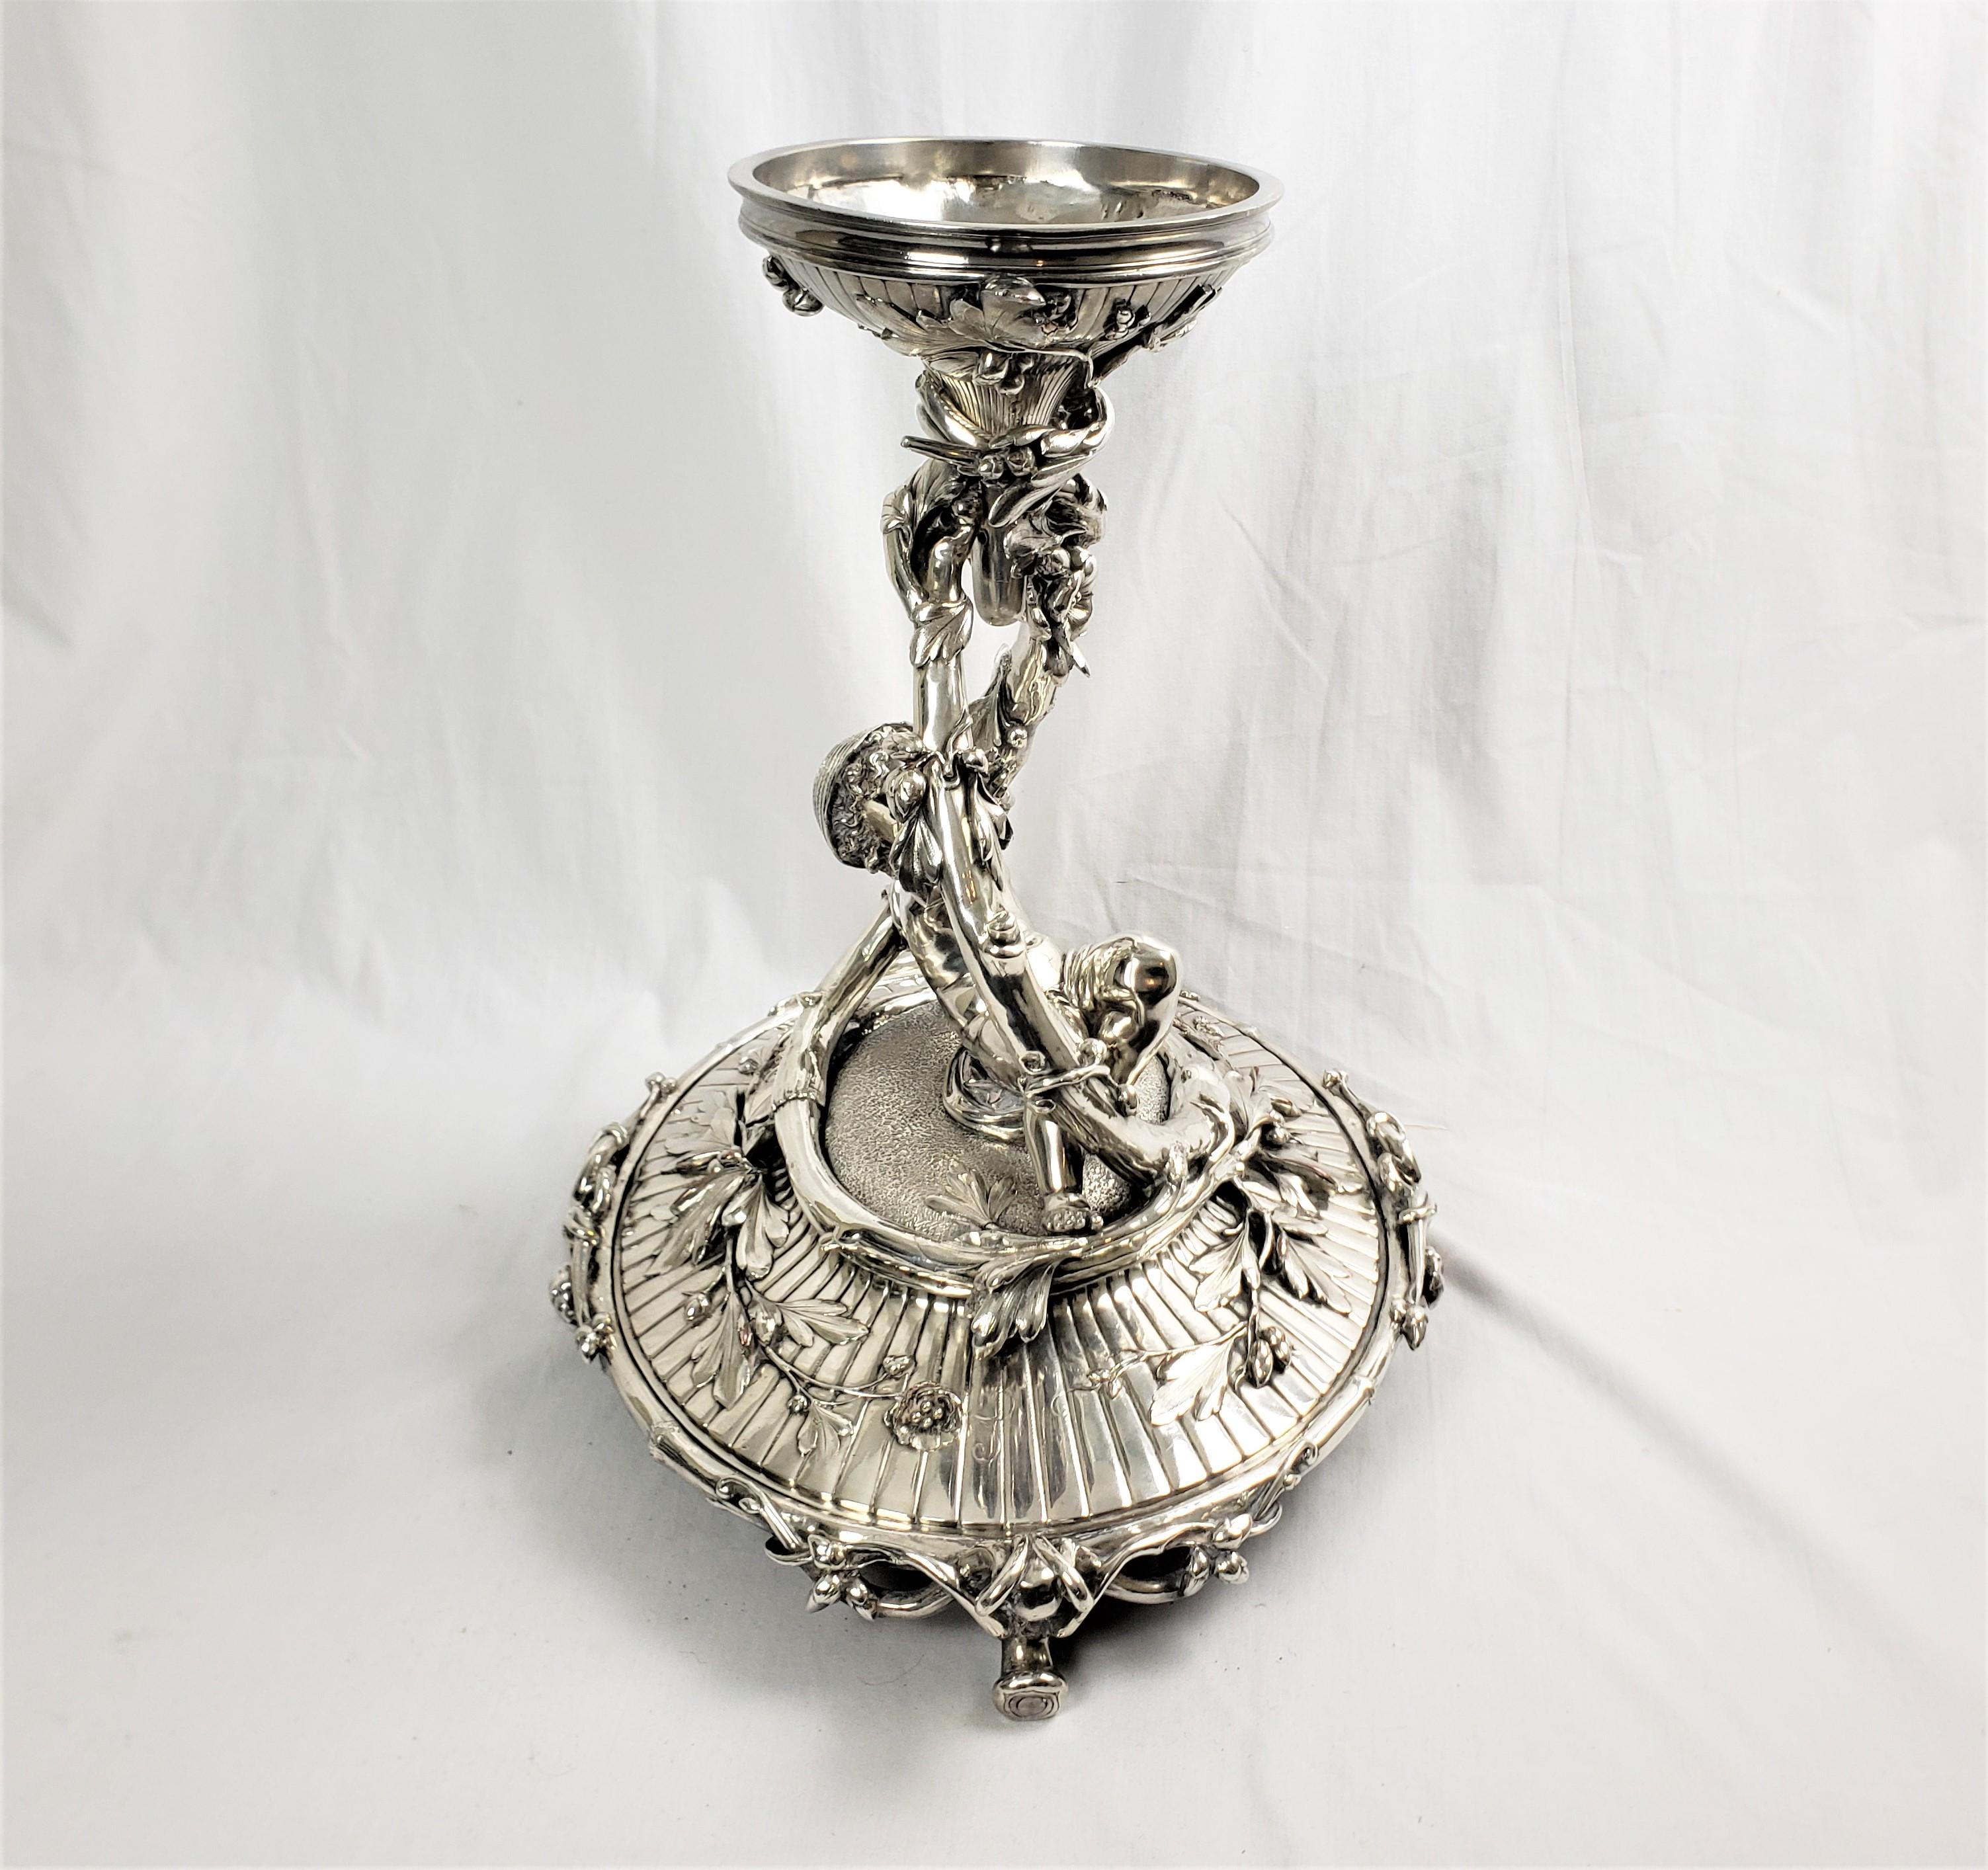 Huge Antique Christofle Silver Plated Centerpiece with a Figural Reclining Child In Good Condition For Sale In Hamilton, Ontario